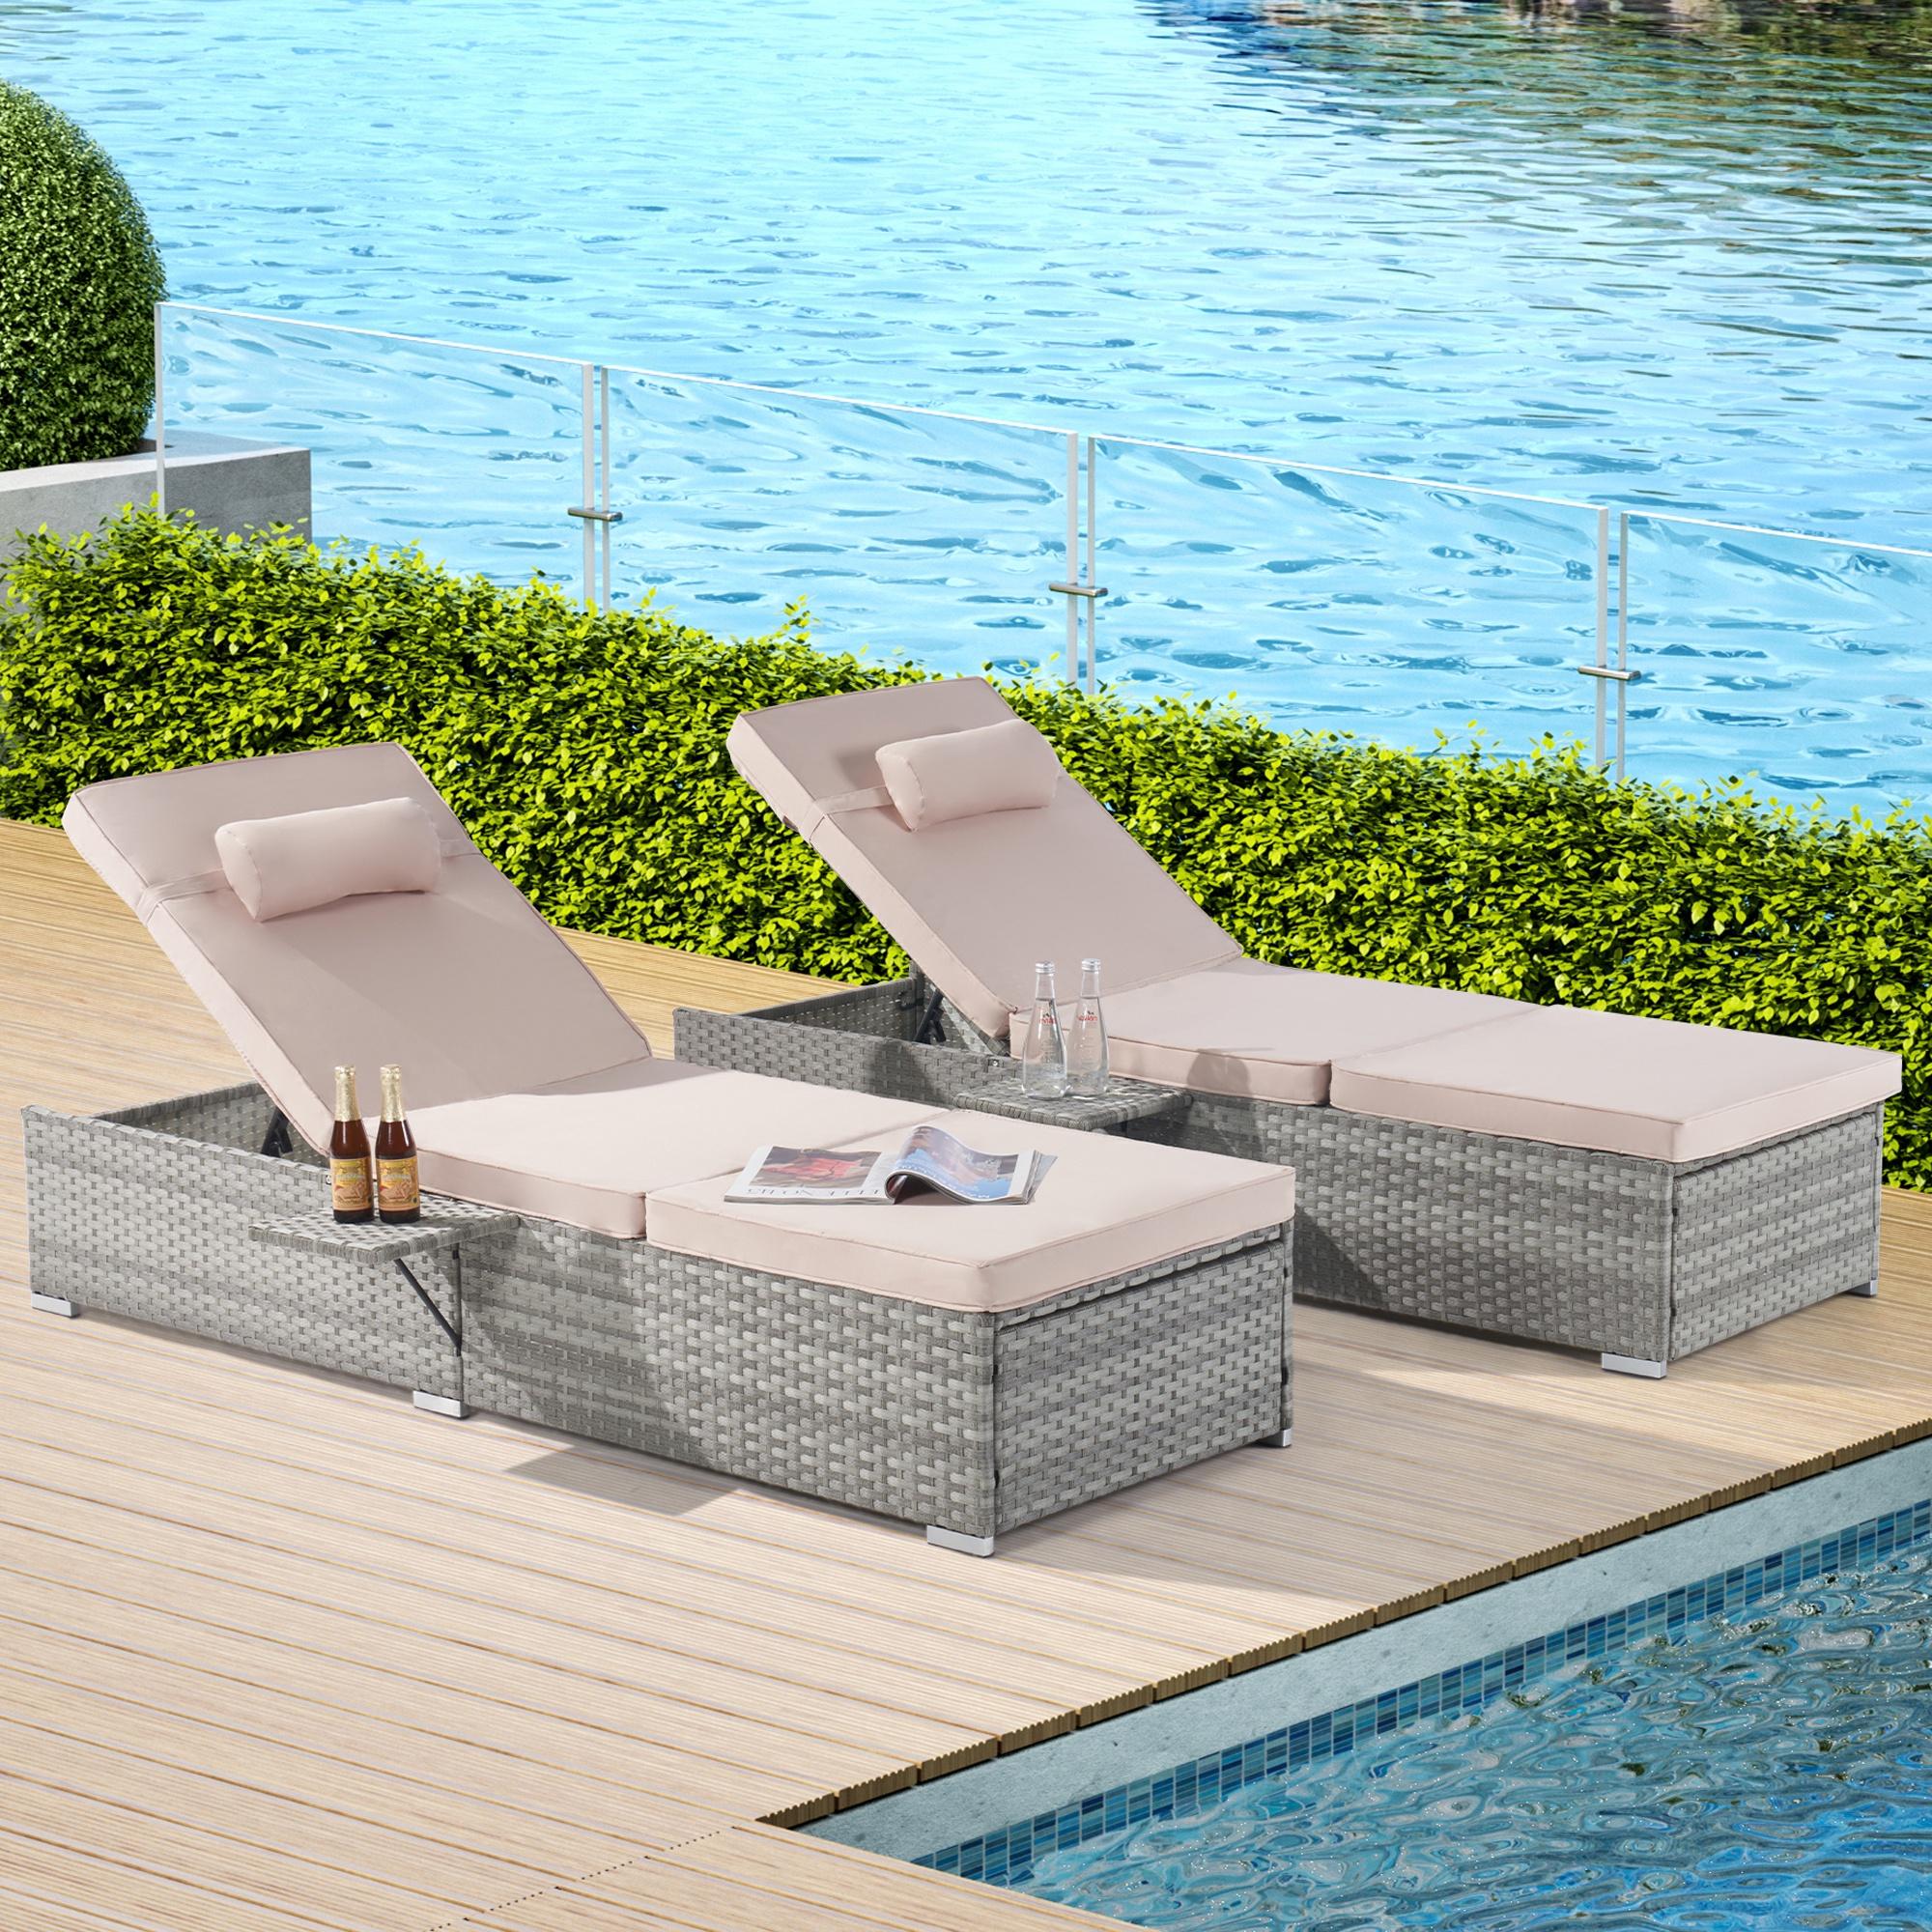 Patio Chaise Lounge Set of 2, Outdoor Lounge Chairs with 5 Backrest Angles, Chaise Lounge Chairs, Patio Reclining Chair Furniture for Poolside, Deck, Backyard - image 1 of 10